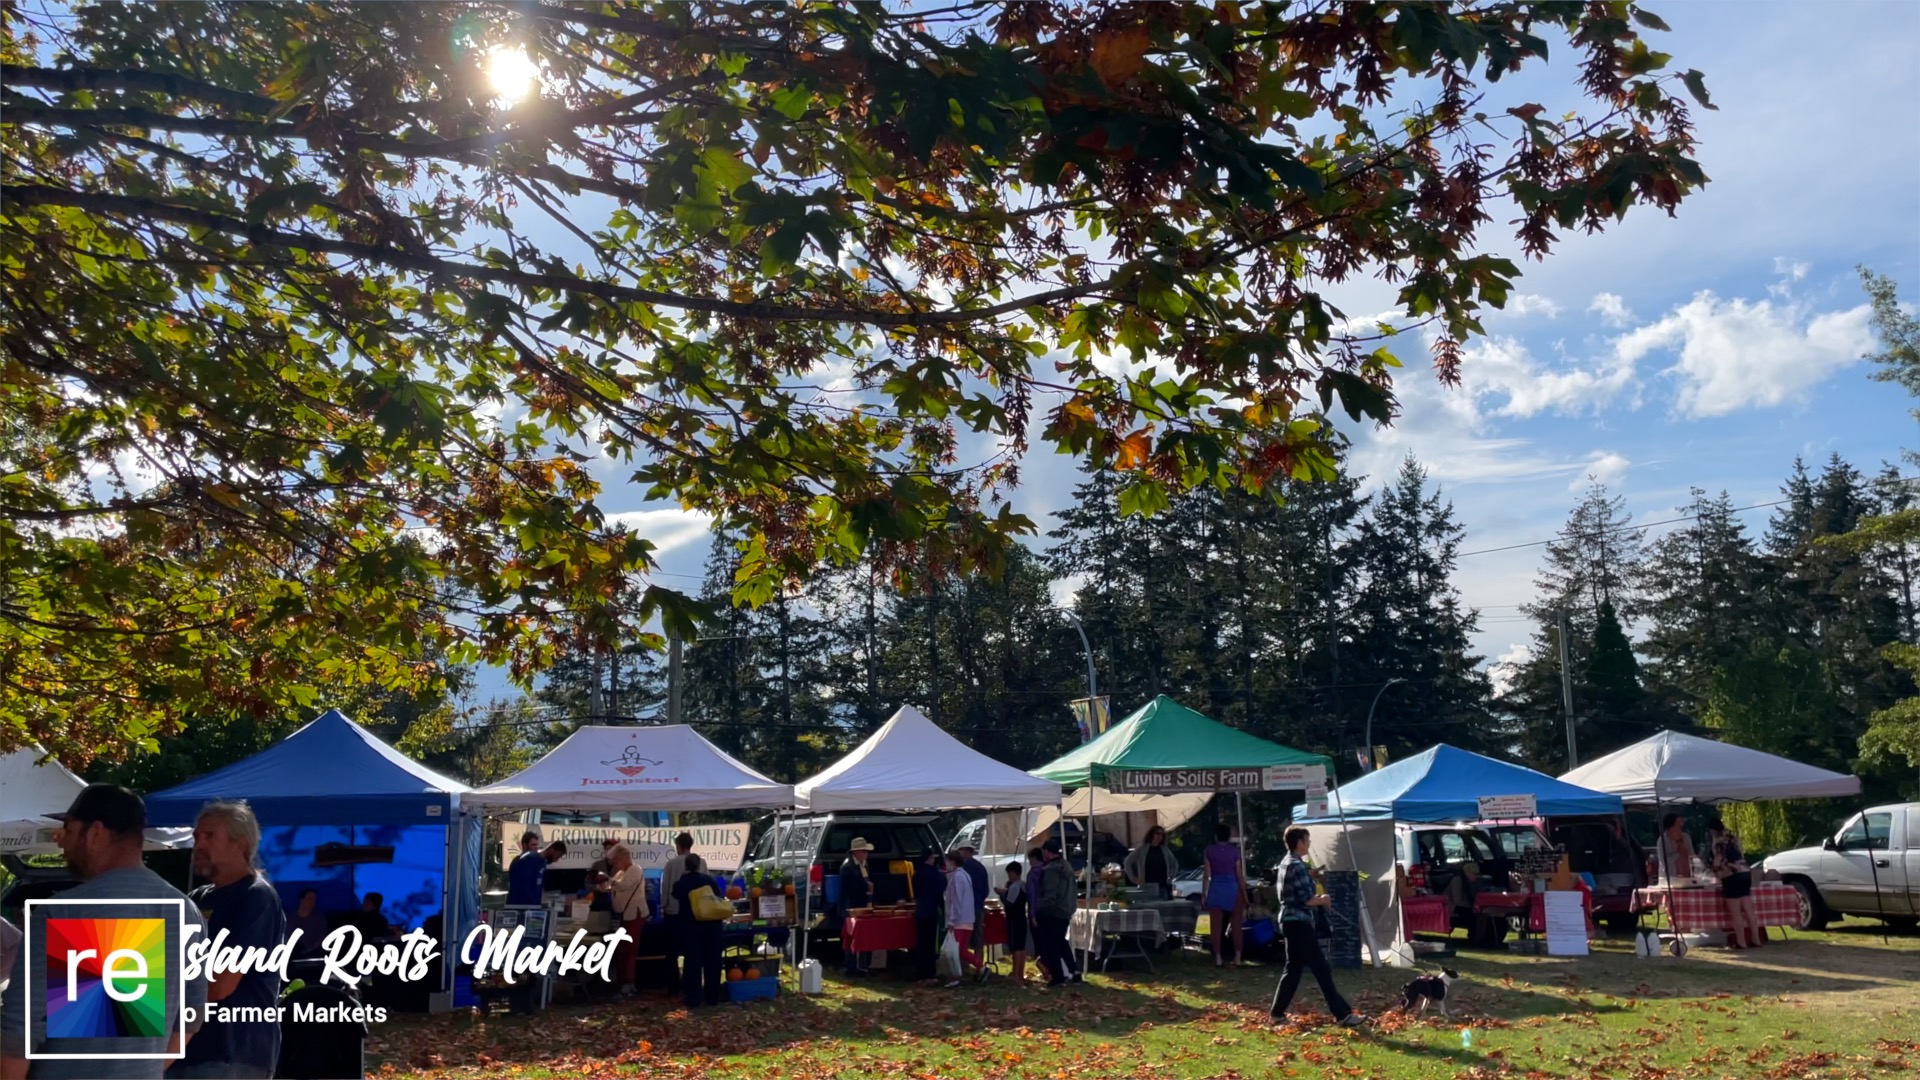 Island Roots Farmers Market on a warm Autumn day